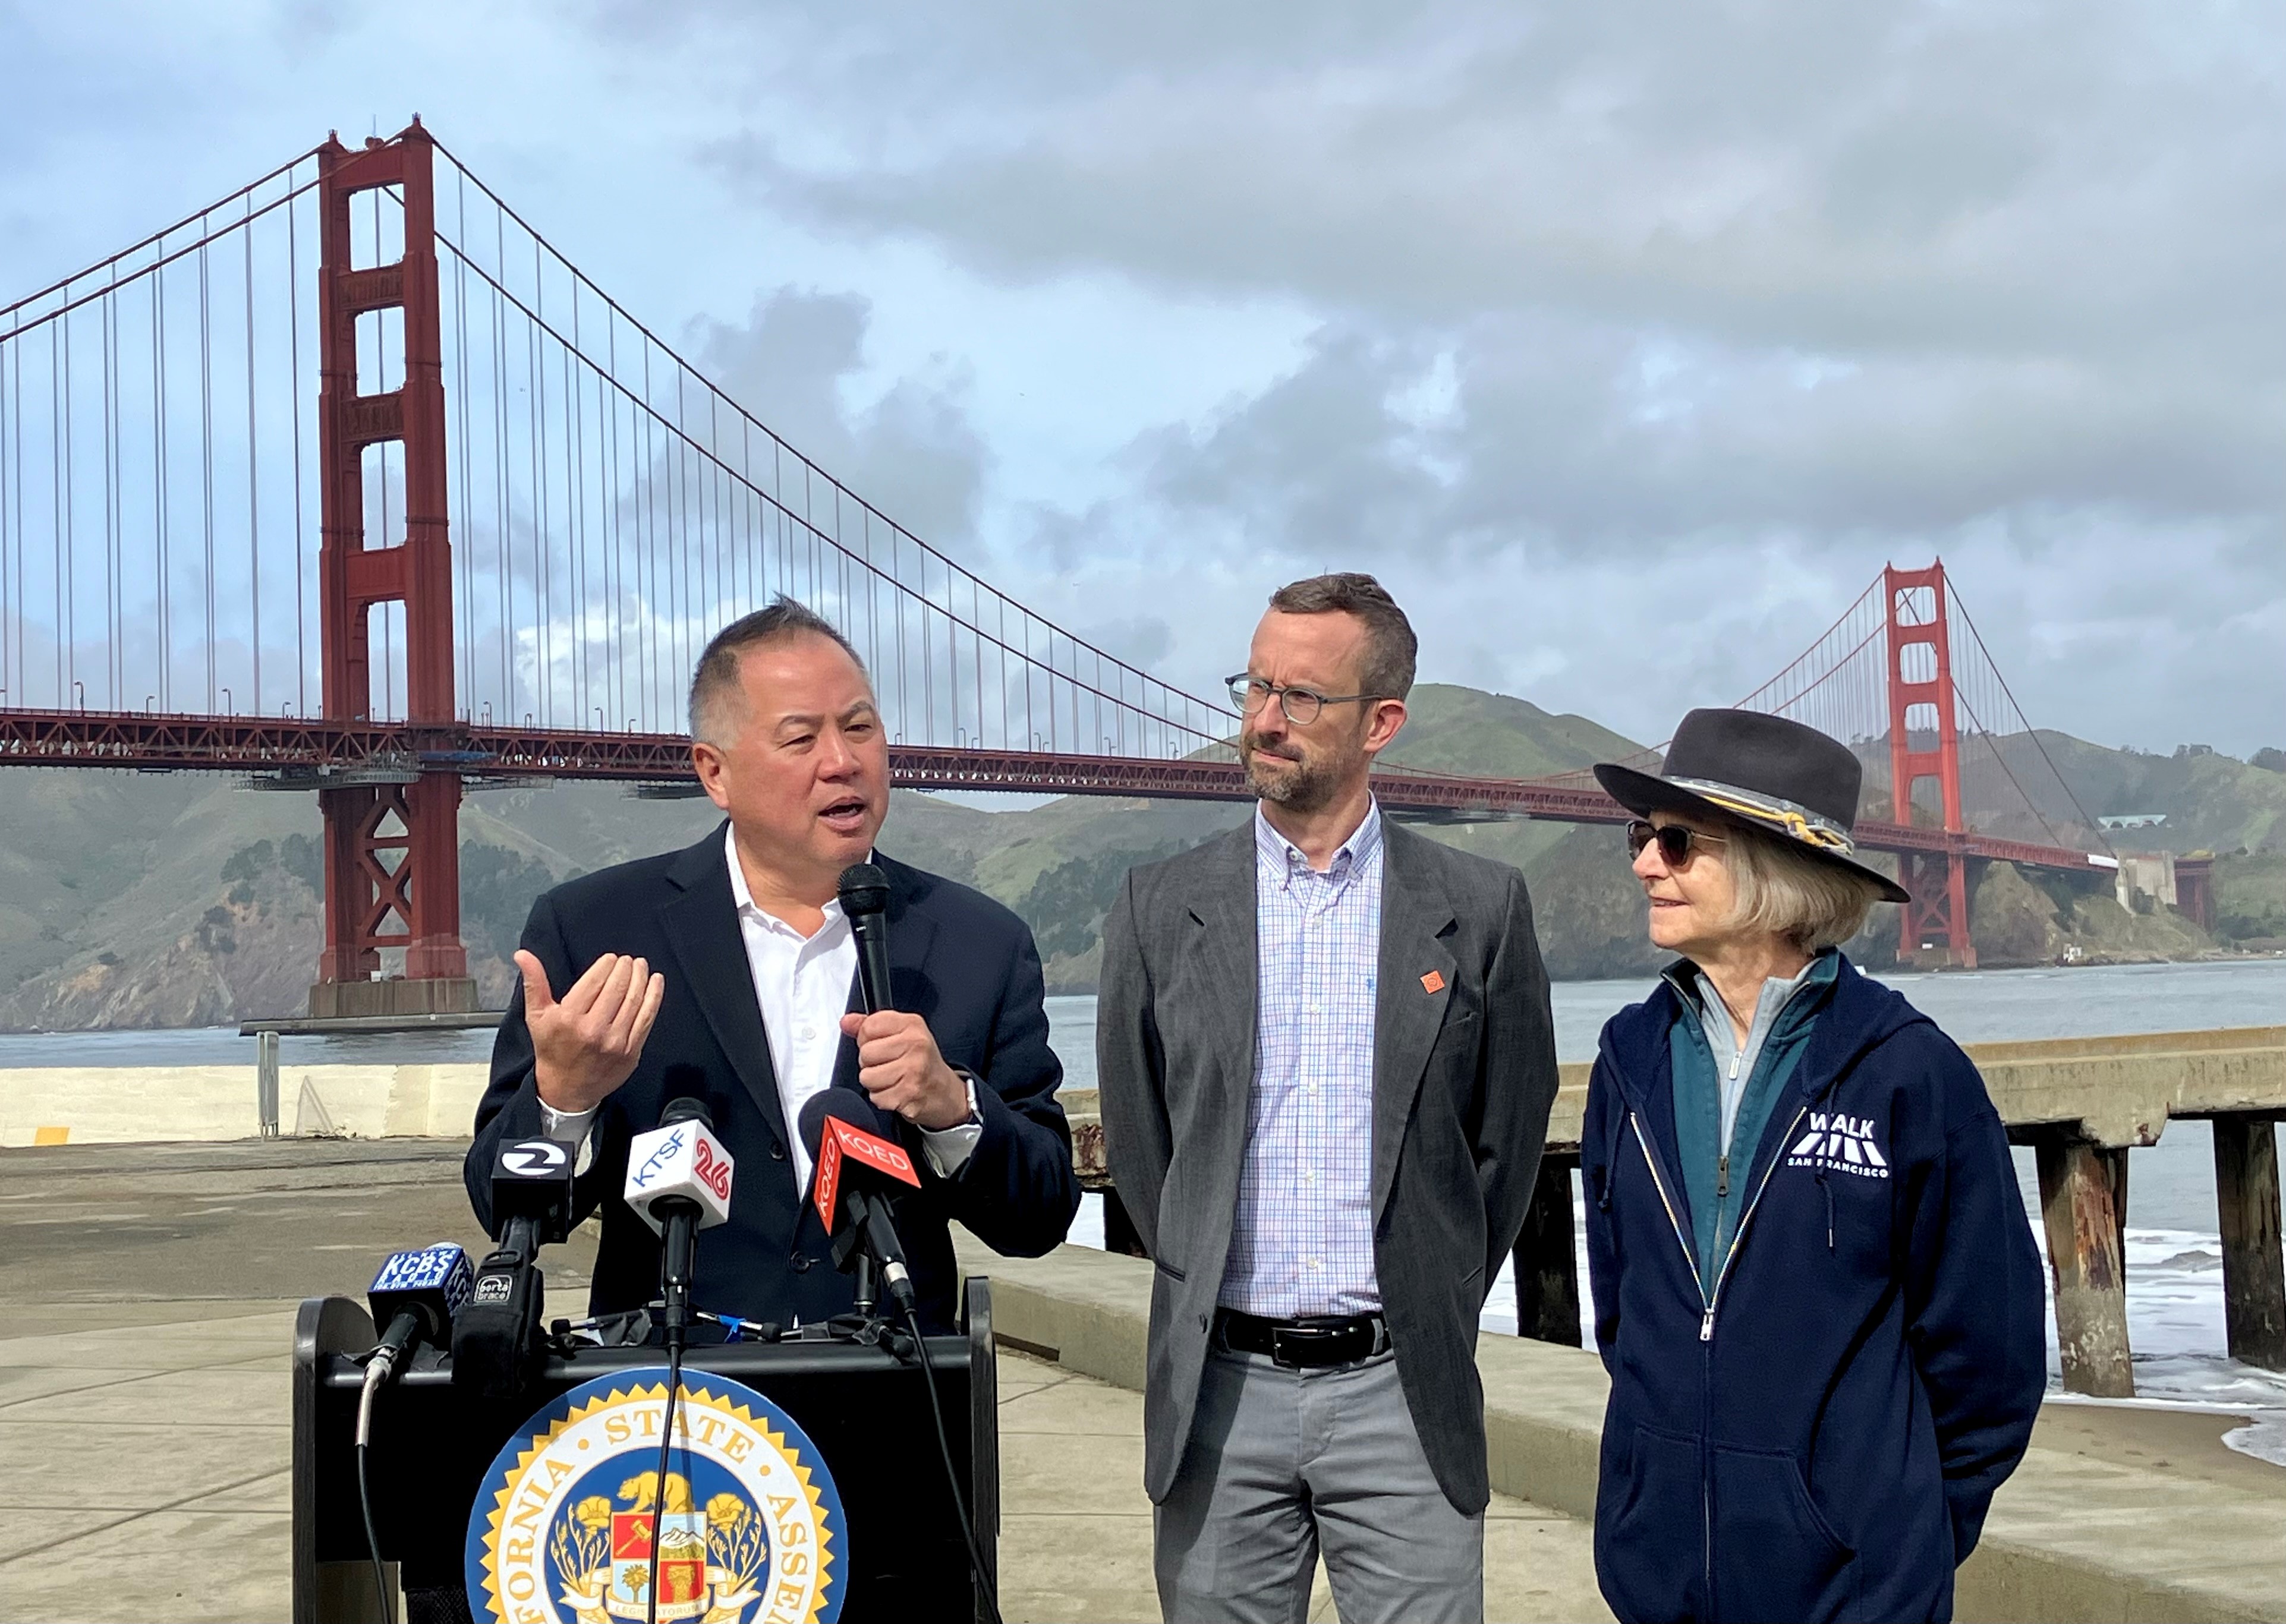 New Legislation By Assemblymember Ting Keeps Bridge Crossings In California Free for Pedestrians and Bicyclists